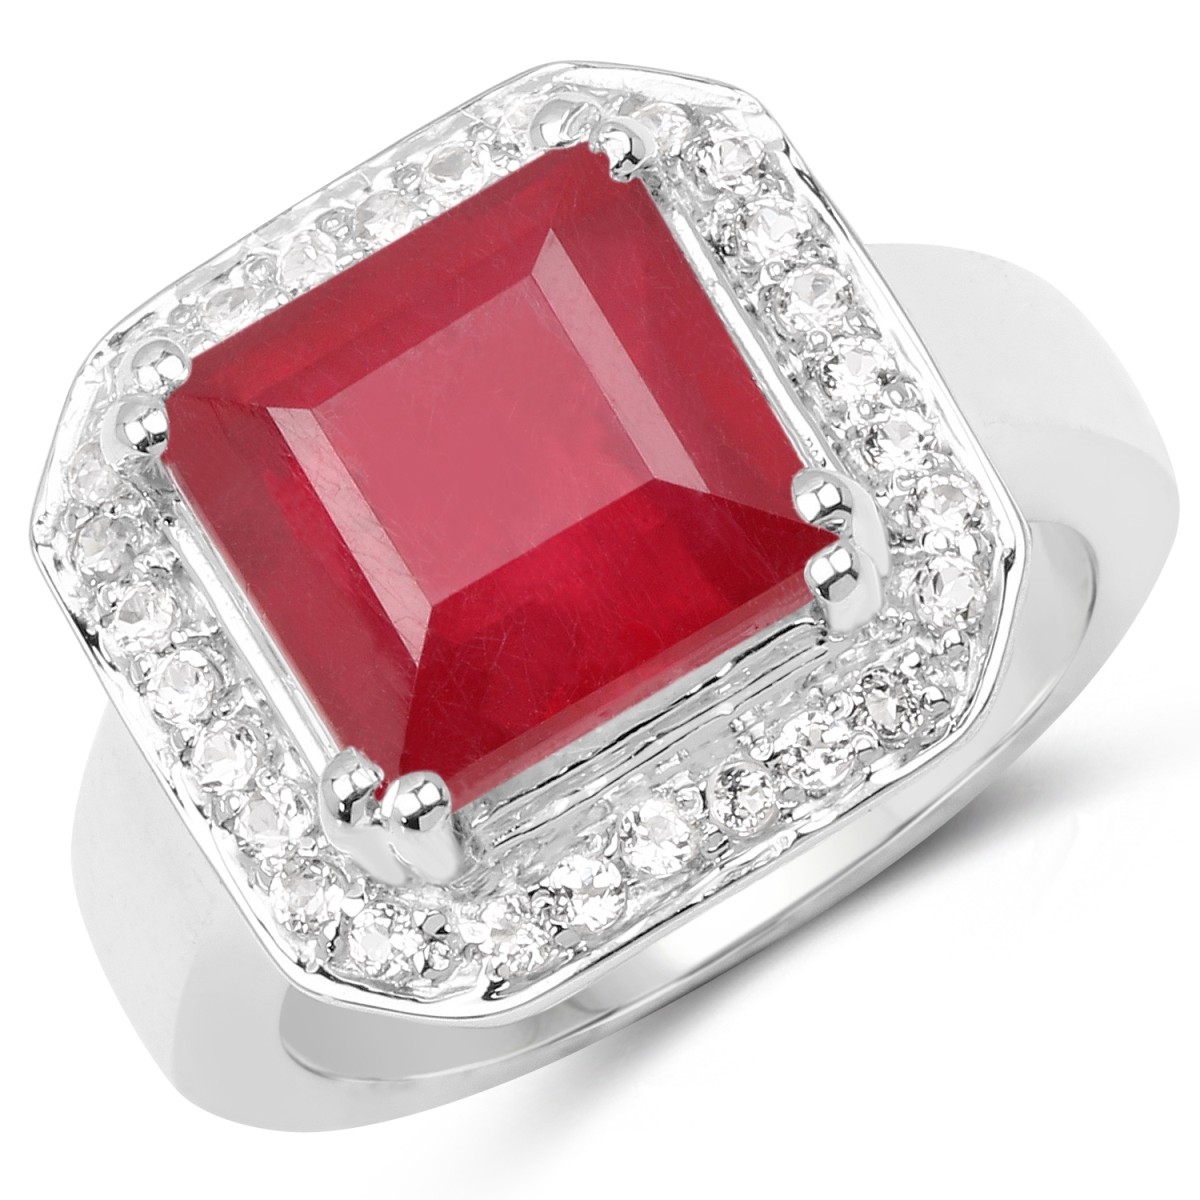 Picture of Malaika QR3820R-SSR-8 6.36 Carat Glass Filled Ruby & White Topaz 0.925 Sterling Silver Ring